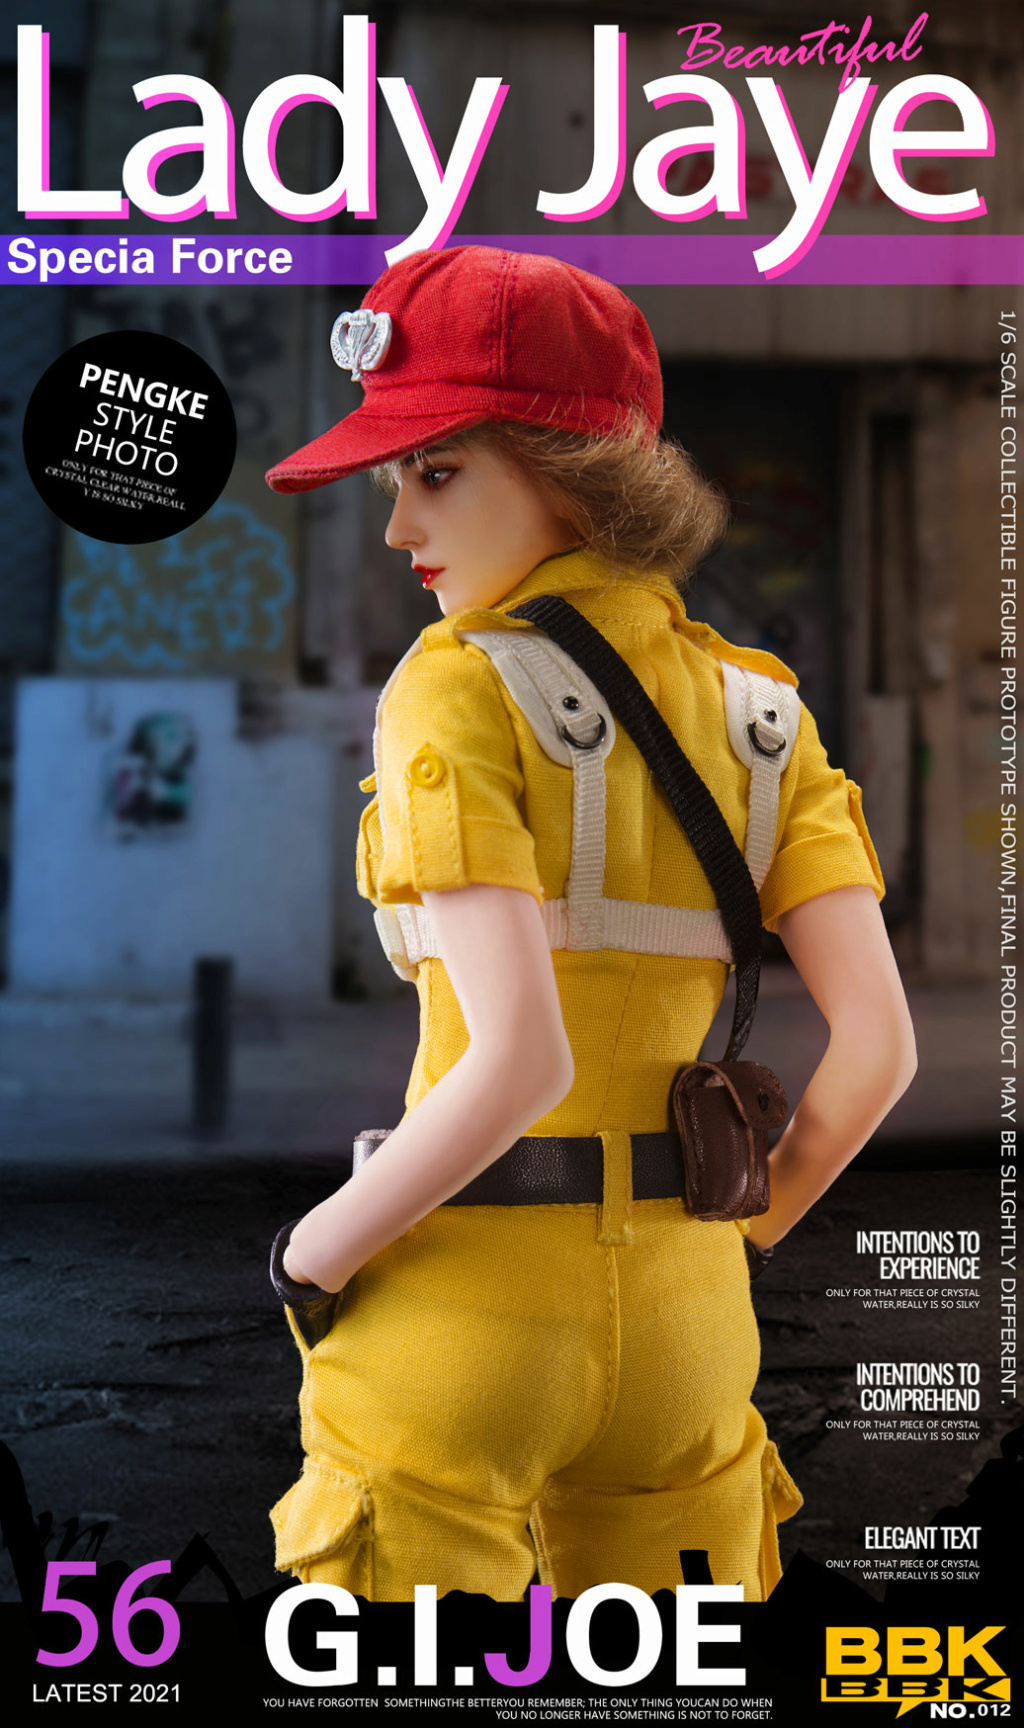 NEW PRODUCT: BBK: 1/6 GIJOE Jay Female Soldier Action Figure# 14575812